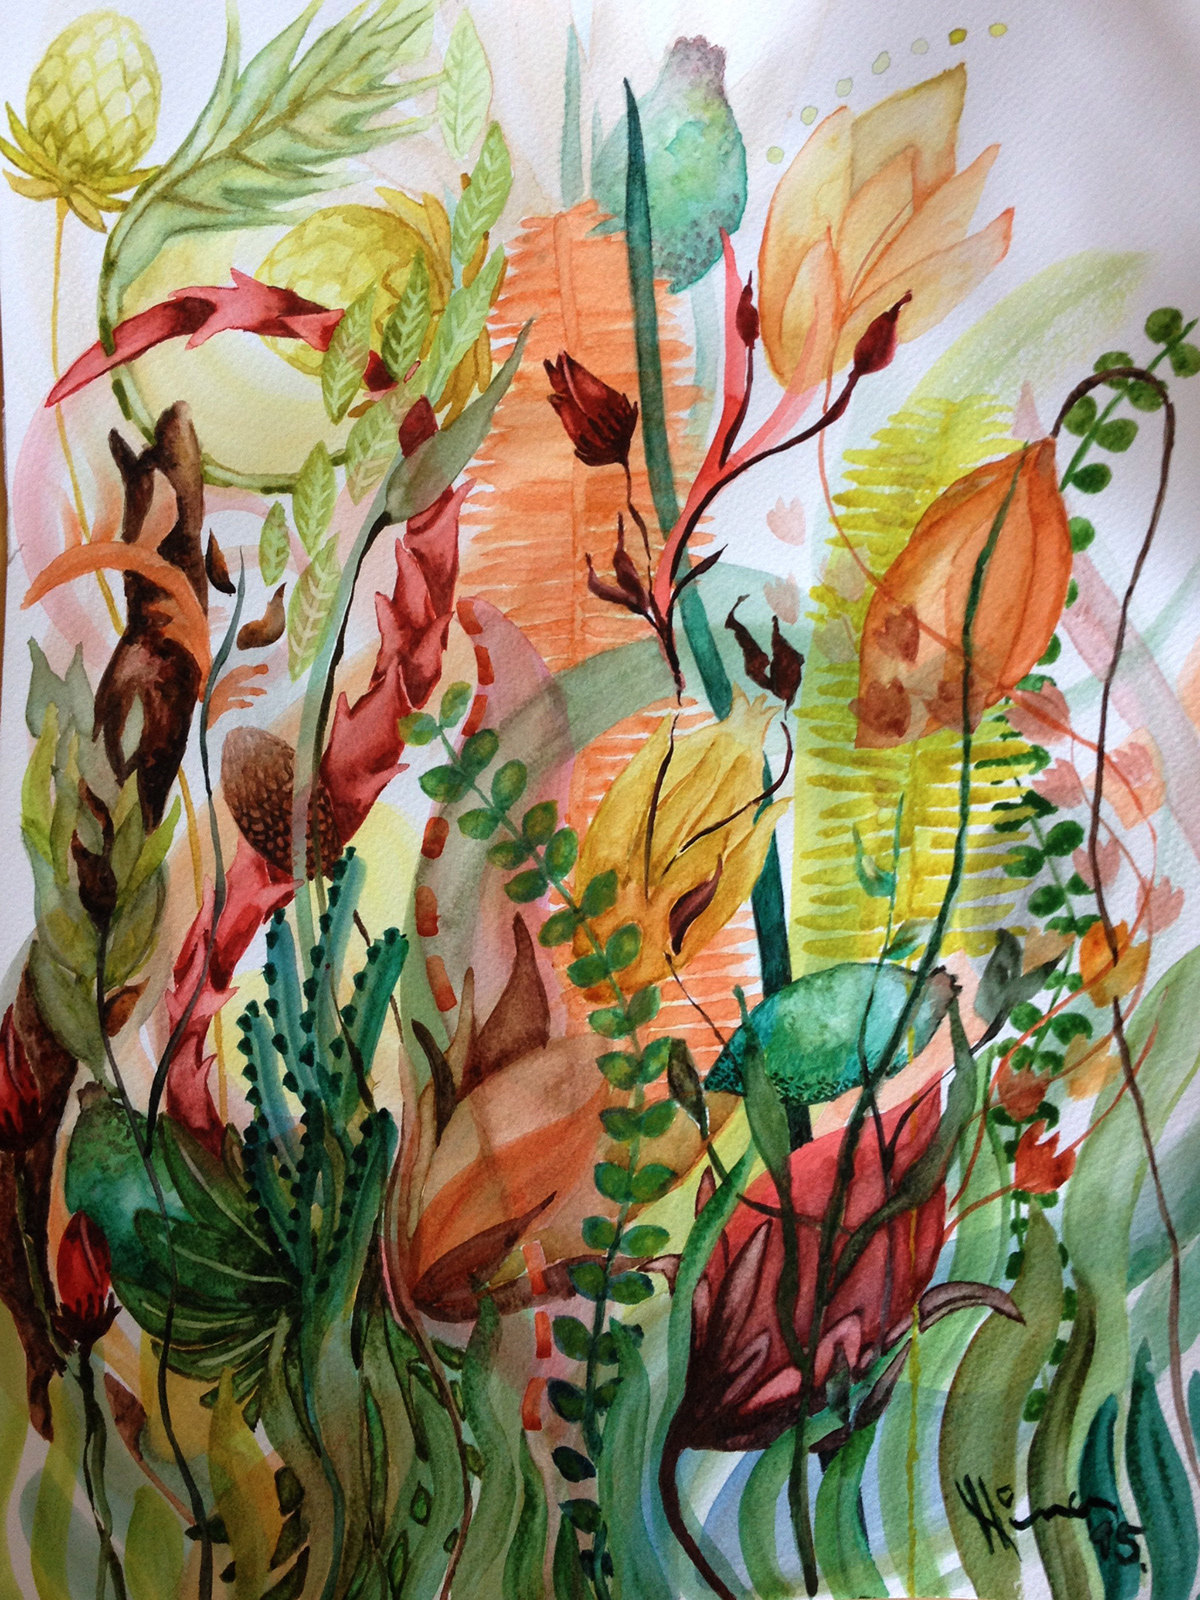 Flowers plants Nature grass water colors paper